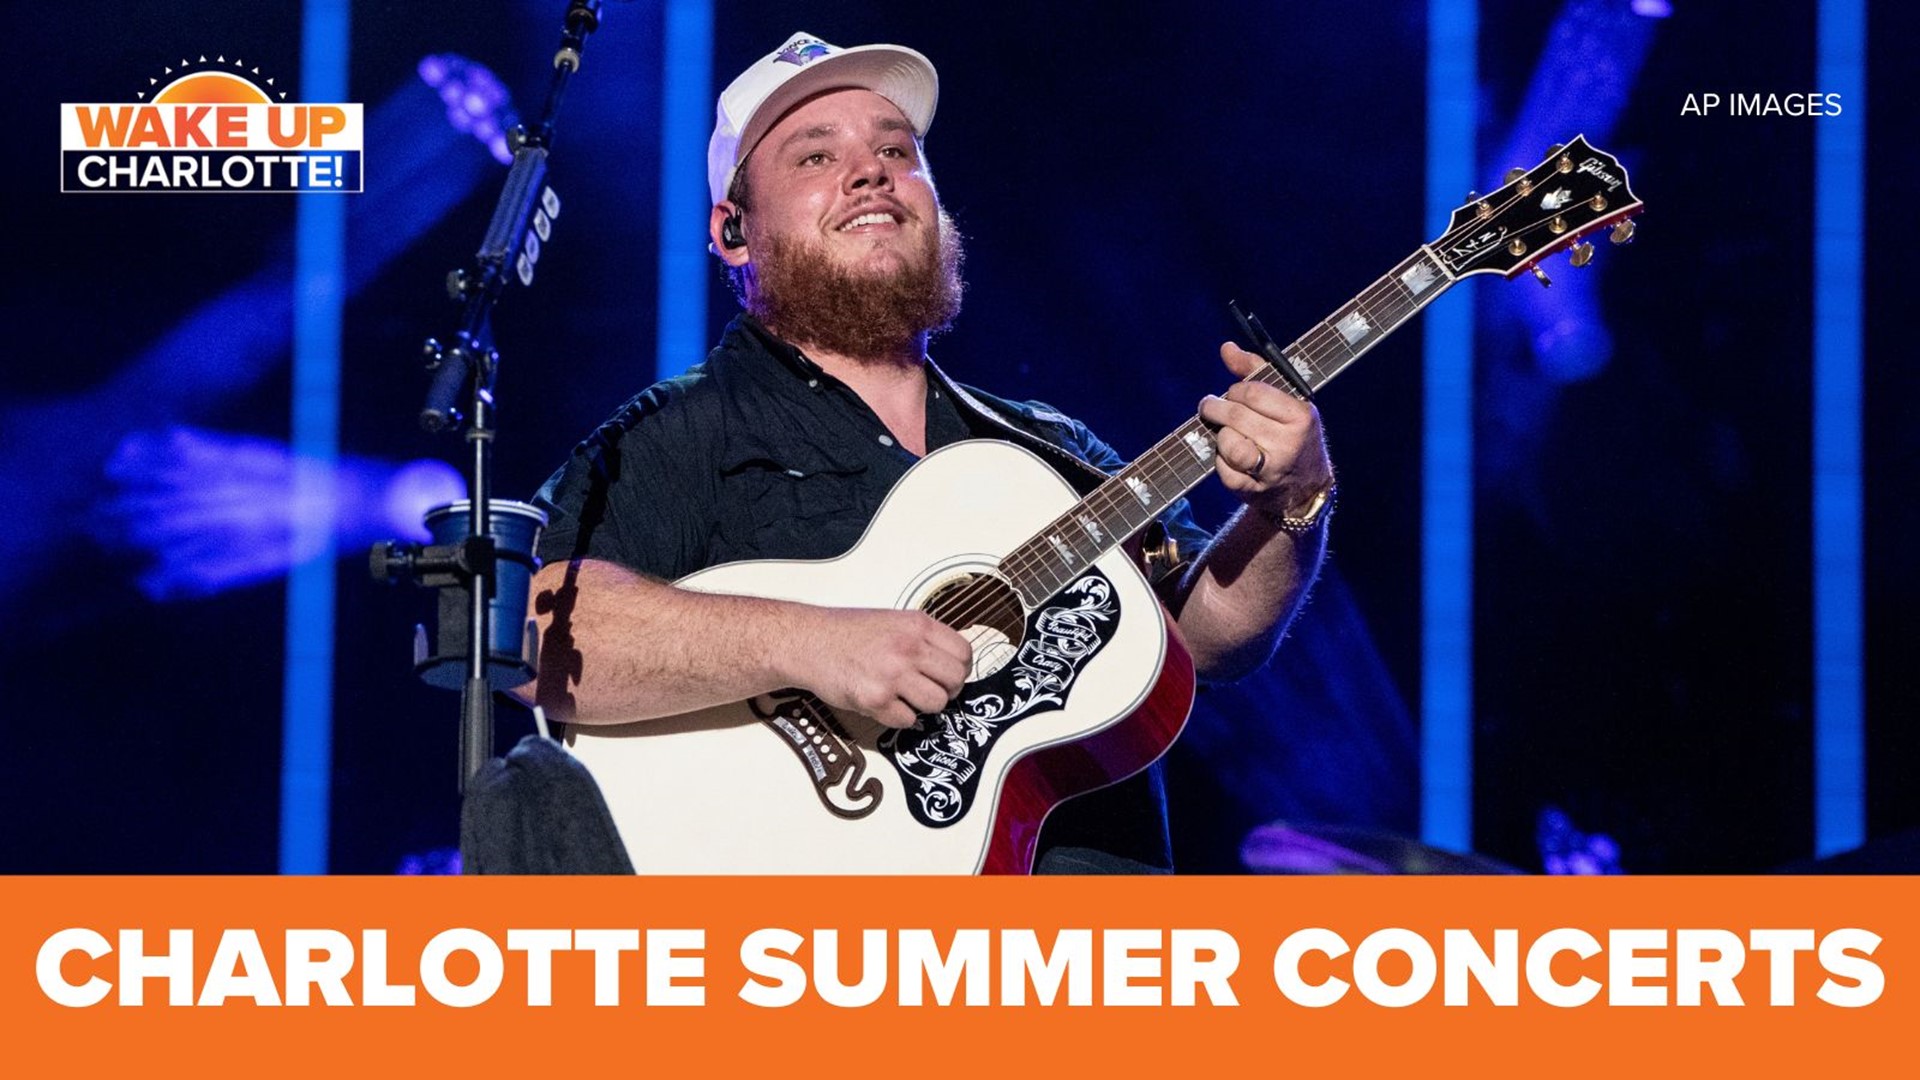 Luke Combs and Beyonce are just two headliners who will perform in Charlotte as David Tepper brings big names to Bank of America Stadium.